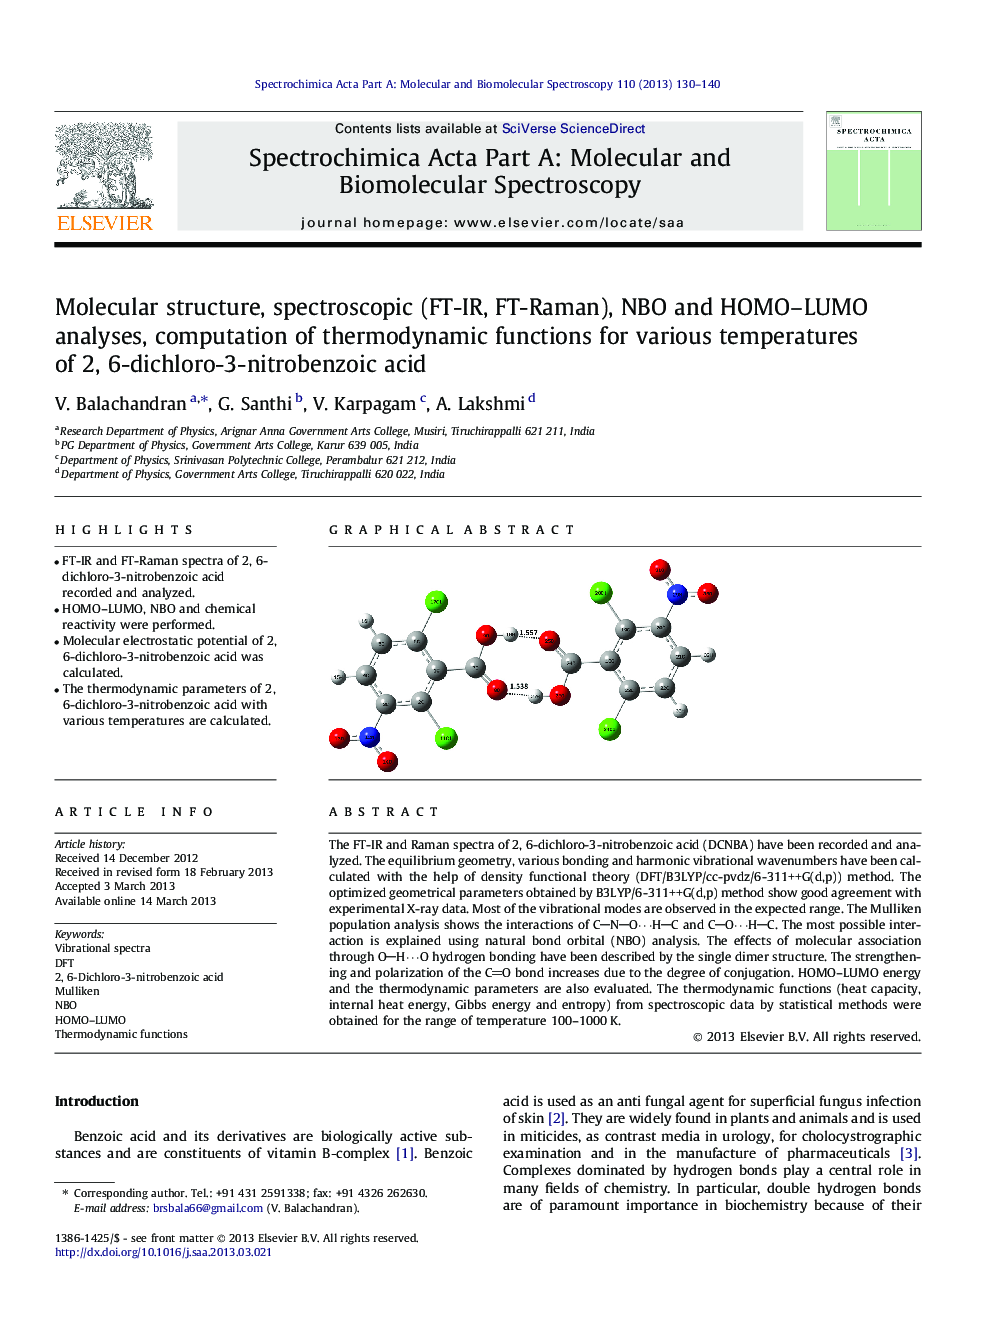 Molecular structure, spectroscopic (FT-IR, FT-Raman), NBO and HOMO–LUMO analyses, computation of thermodynamic functions for various temperatures of 2, 6-dichloro-3-nitrobenzoic acid